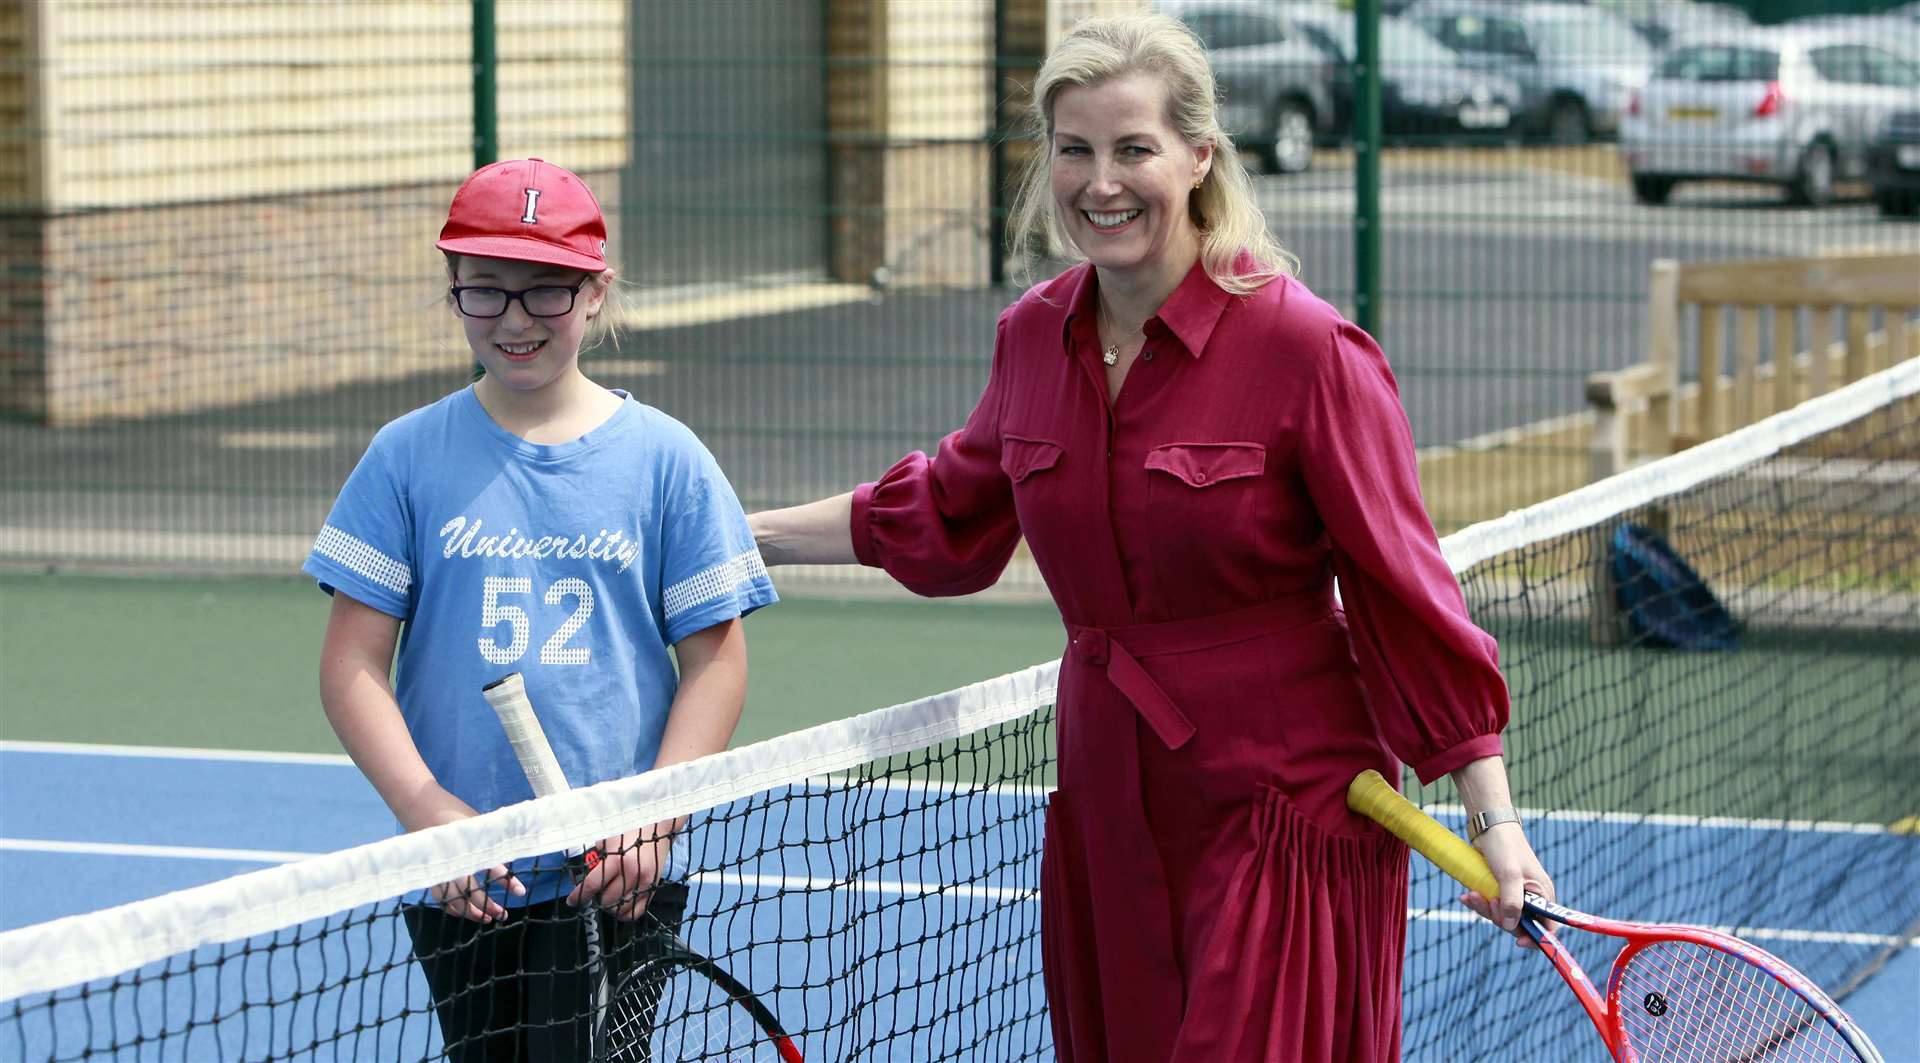 Sophie Countess of Wessex opens Marden Sports Club with young tennis player Indigo Williams, aged 11